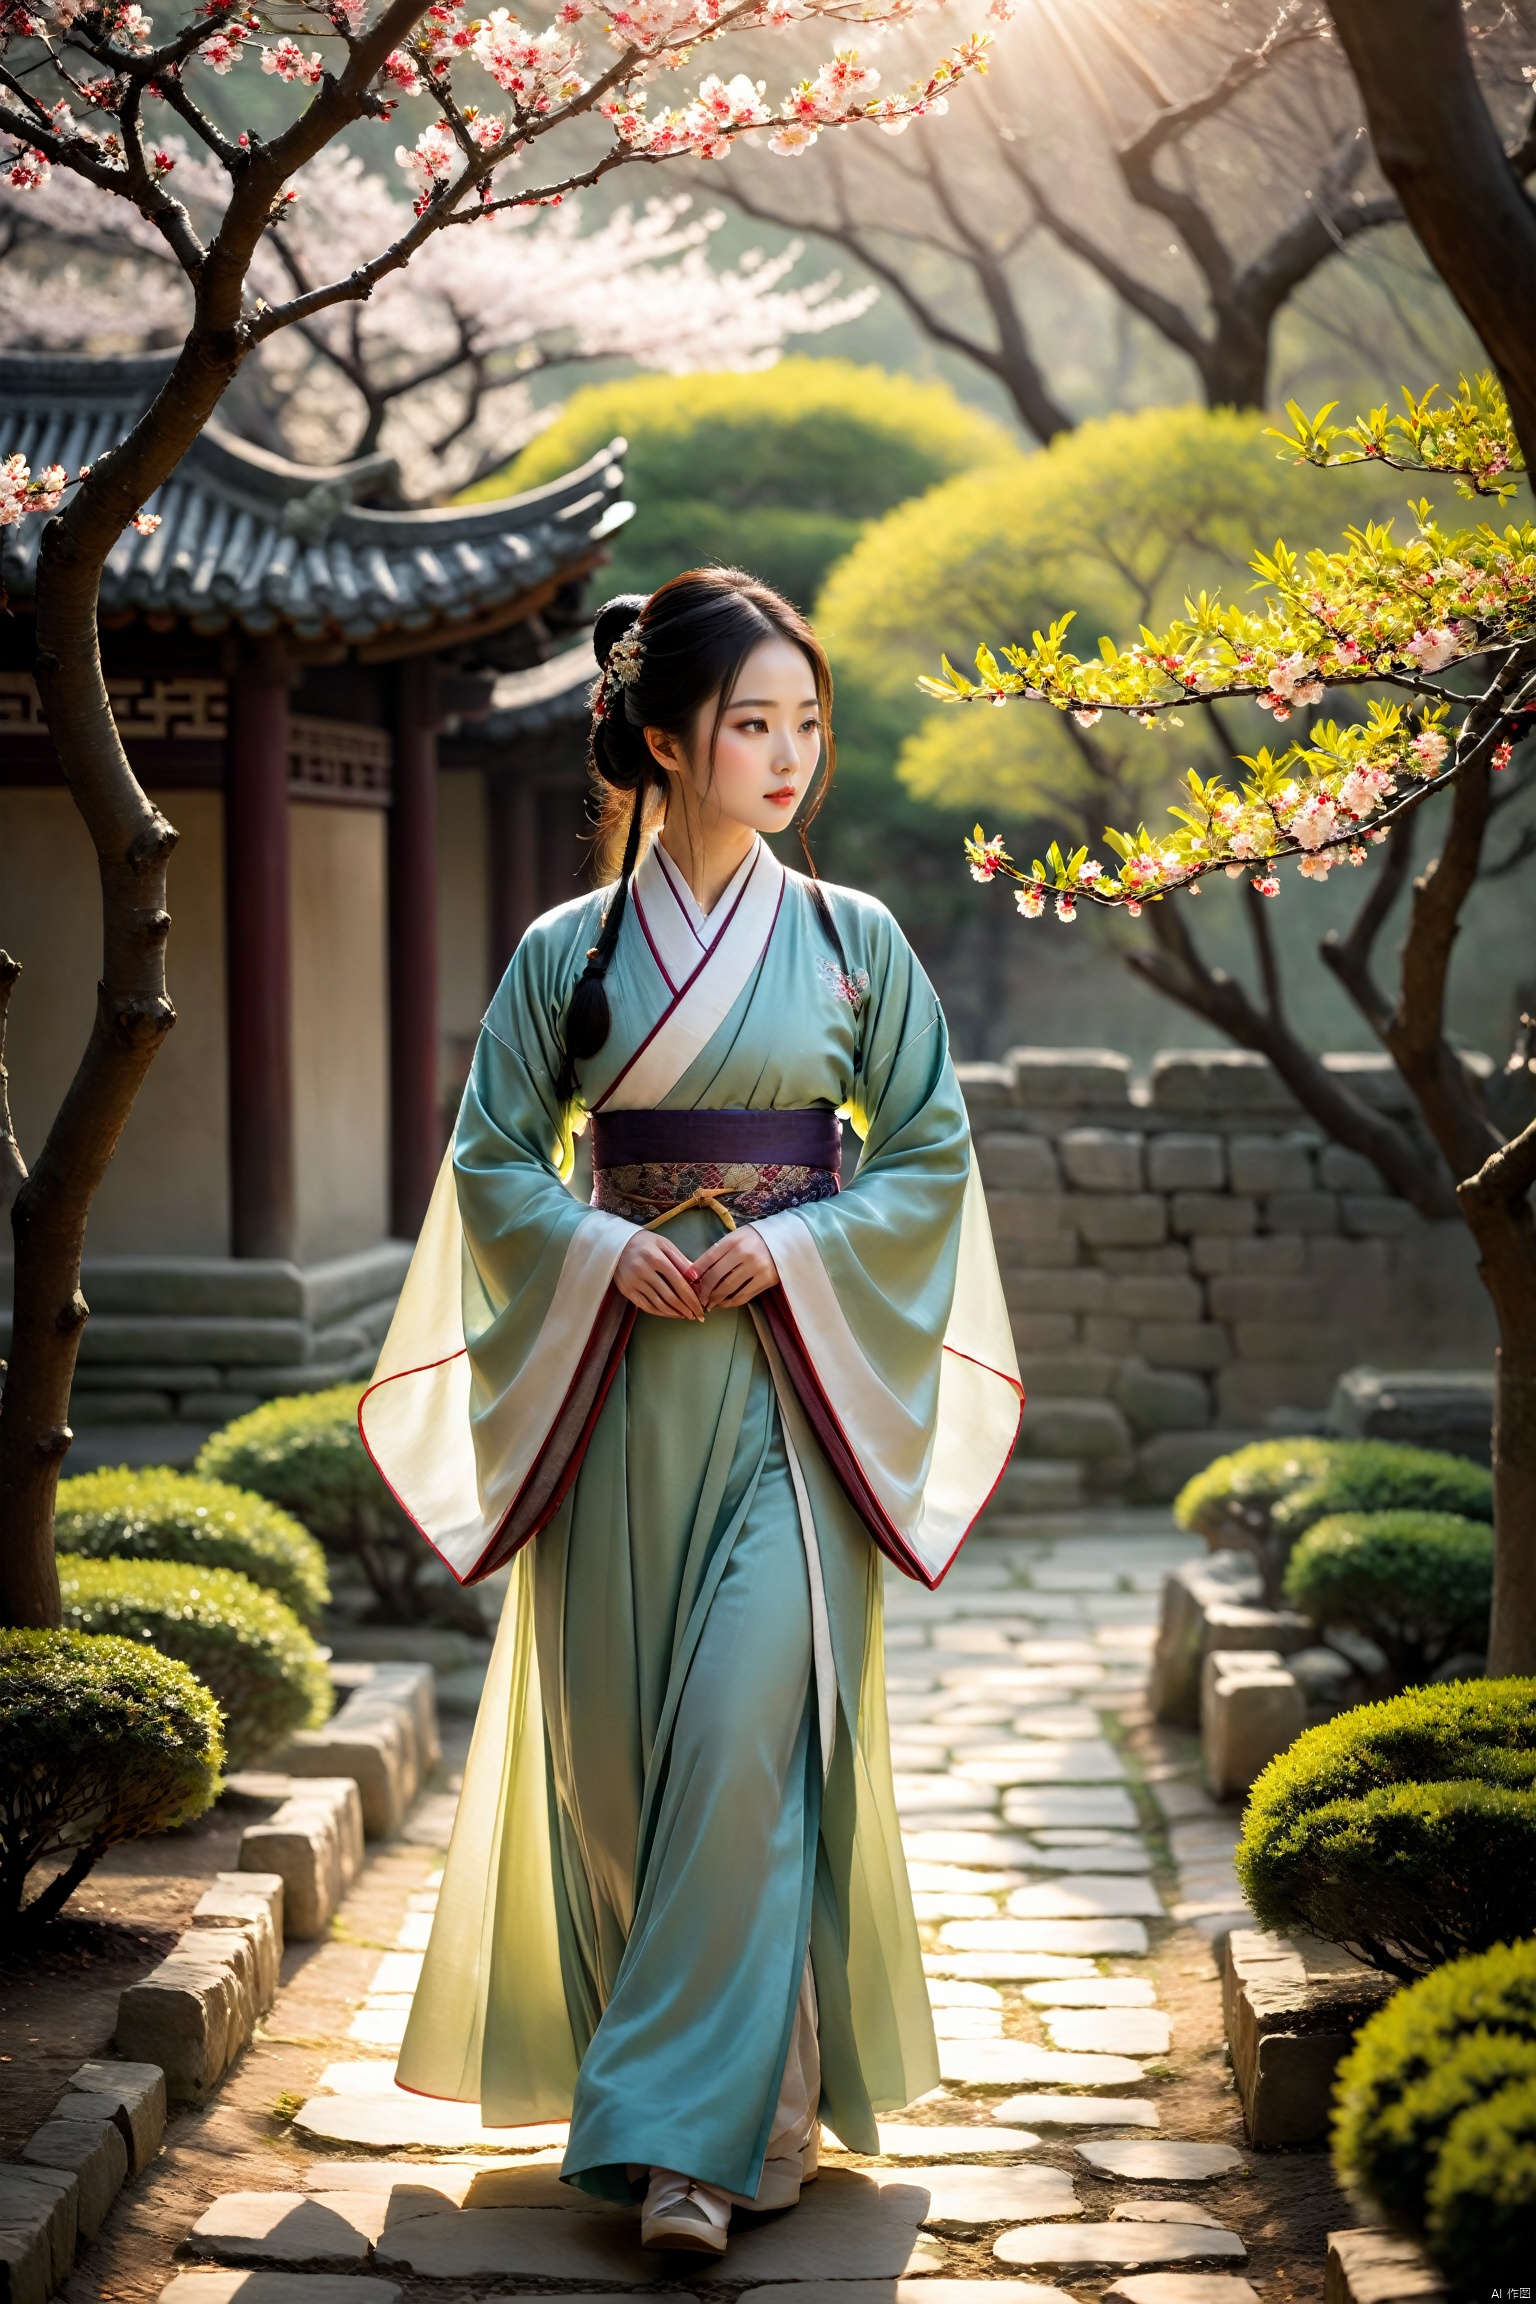 The young woman, dressed in a subtle Wei and Jin dynasty Hanfu, walks through an ancient garden. Sunlight filters through the branches of ancient trees, casting dappled shadows on the stone path. Her eyes hold a contemplative gaze towards history, as she gently touches a blooming plum blossom, as if conversing with the ancients.